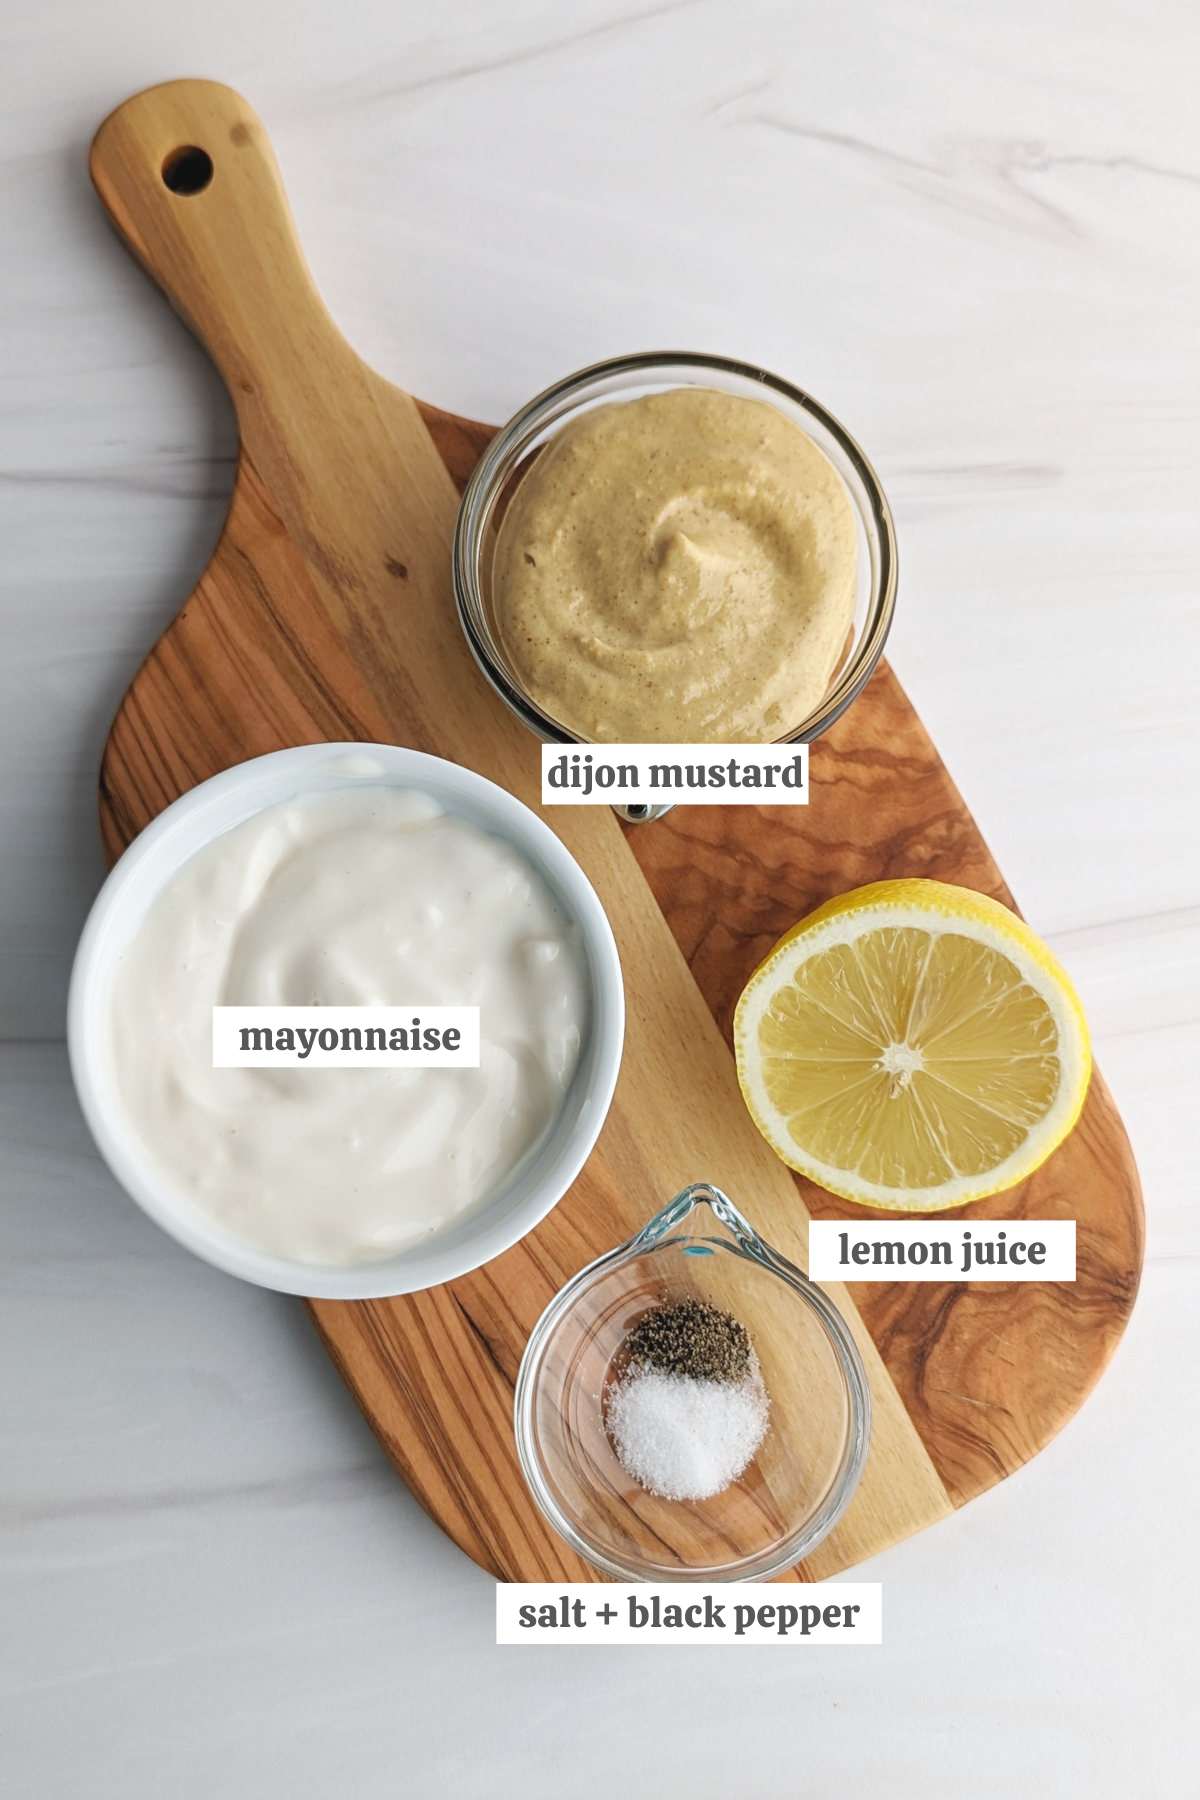 Gathered ingredients for this dijonnaise recipe.